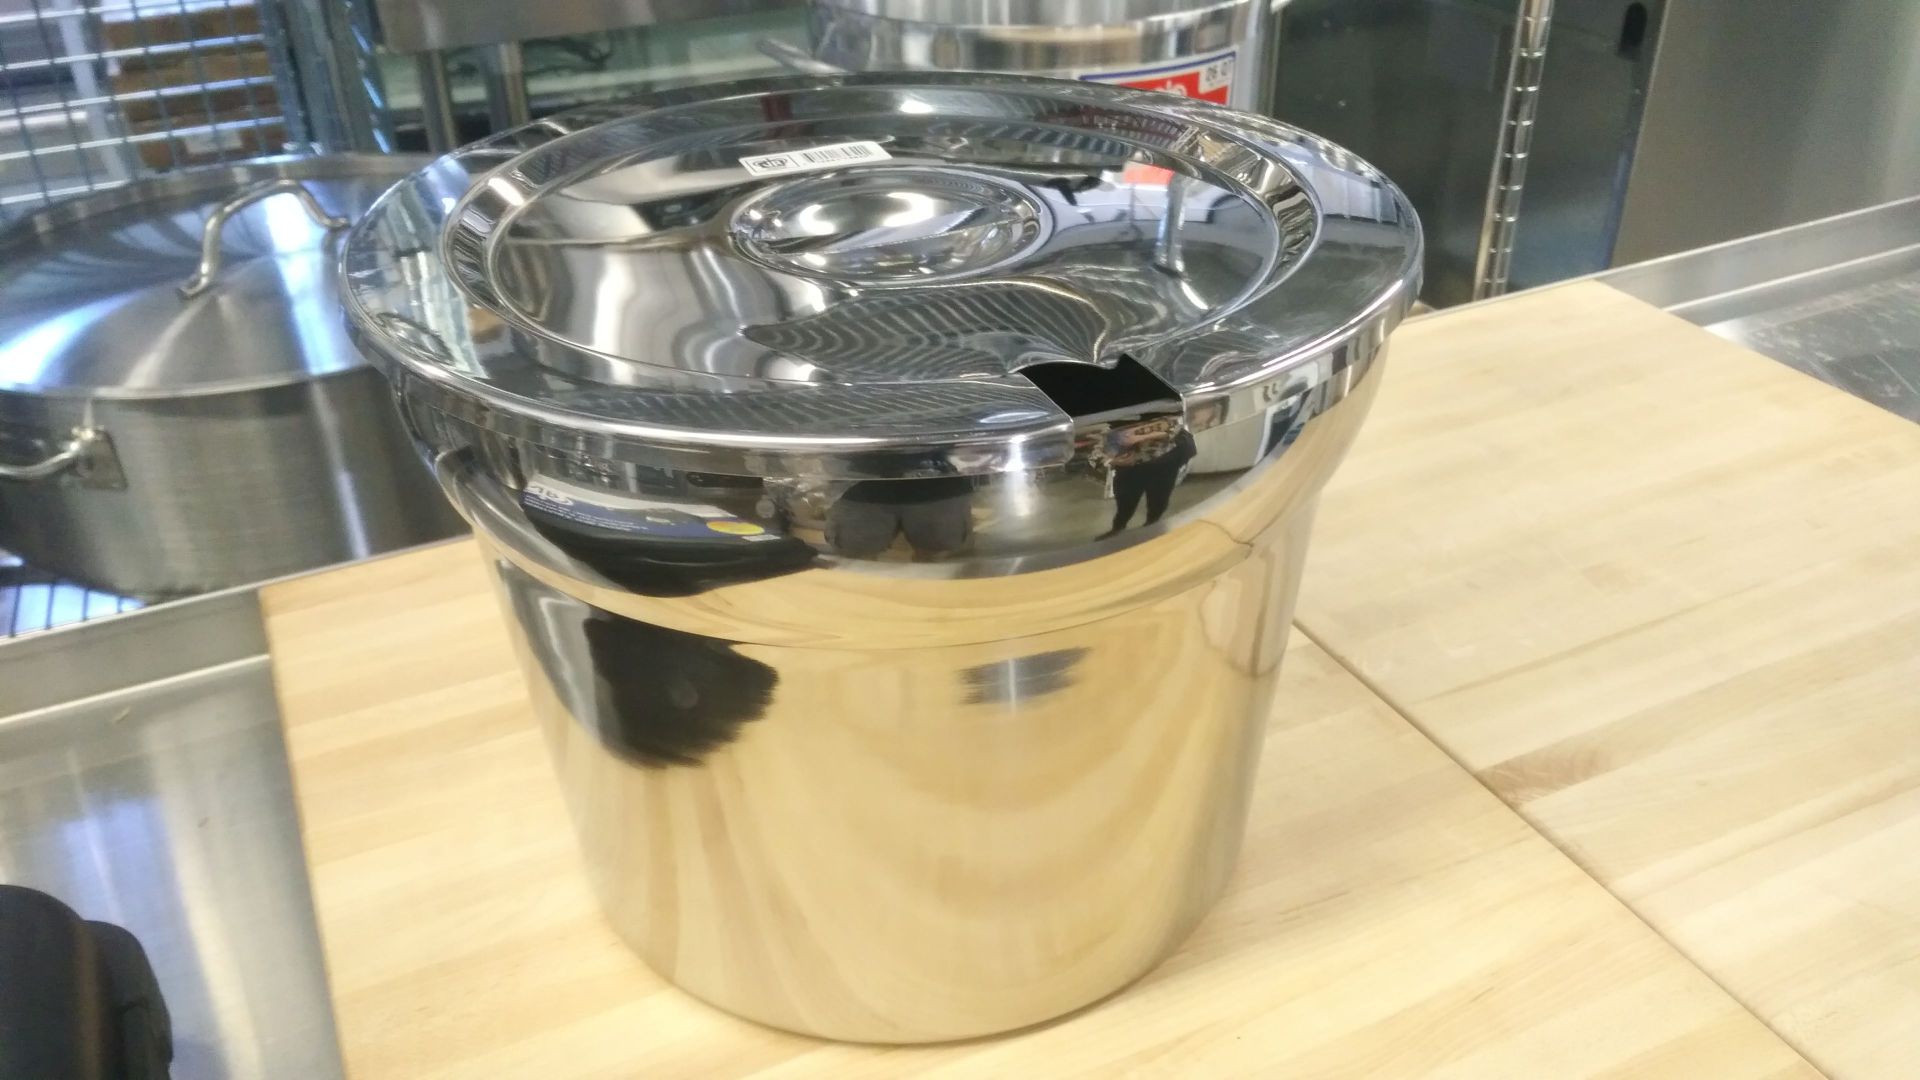 11qt Round Stainless Insert with Slotted Lid - Image 2 of 2